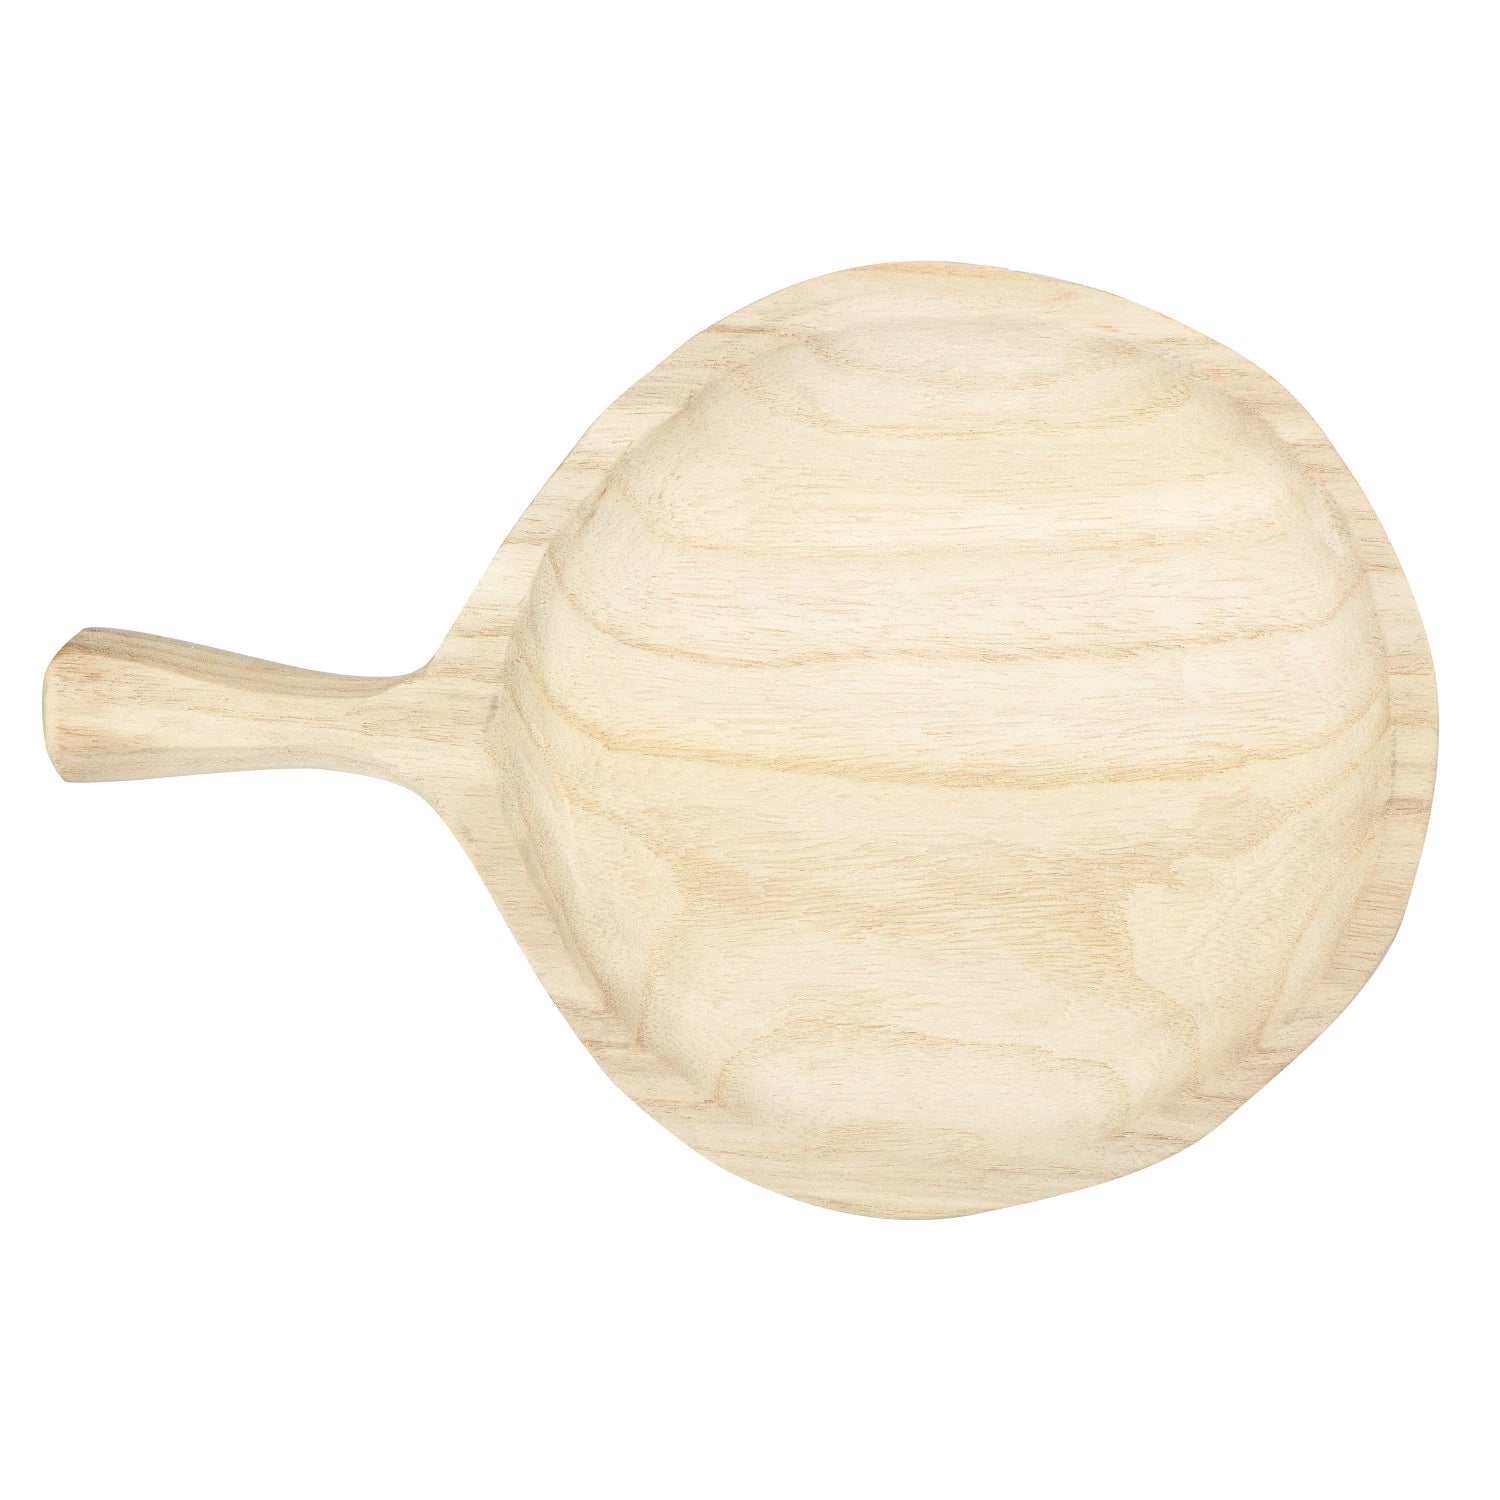 A Bloomingville Paulownia Wood Tray with Handle with a smooth, round surface and a handle, isolated on a white background in Scottsdale, Arizona.